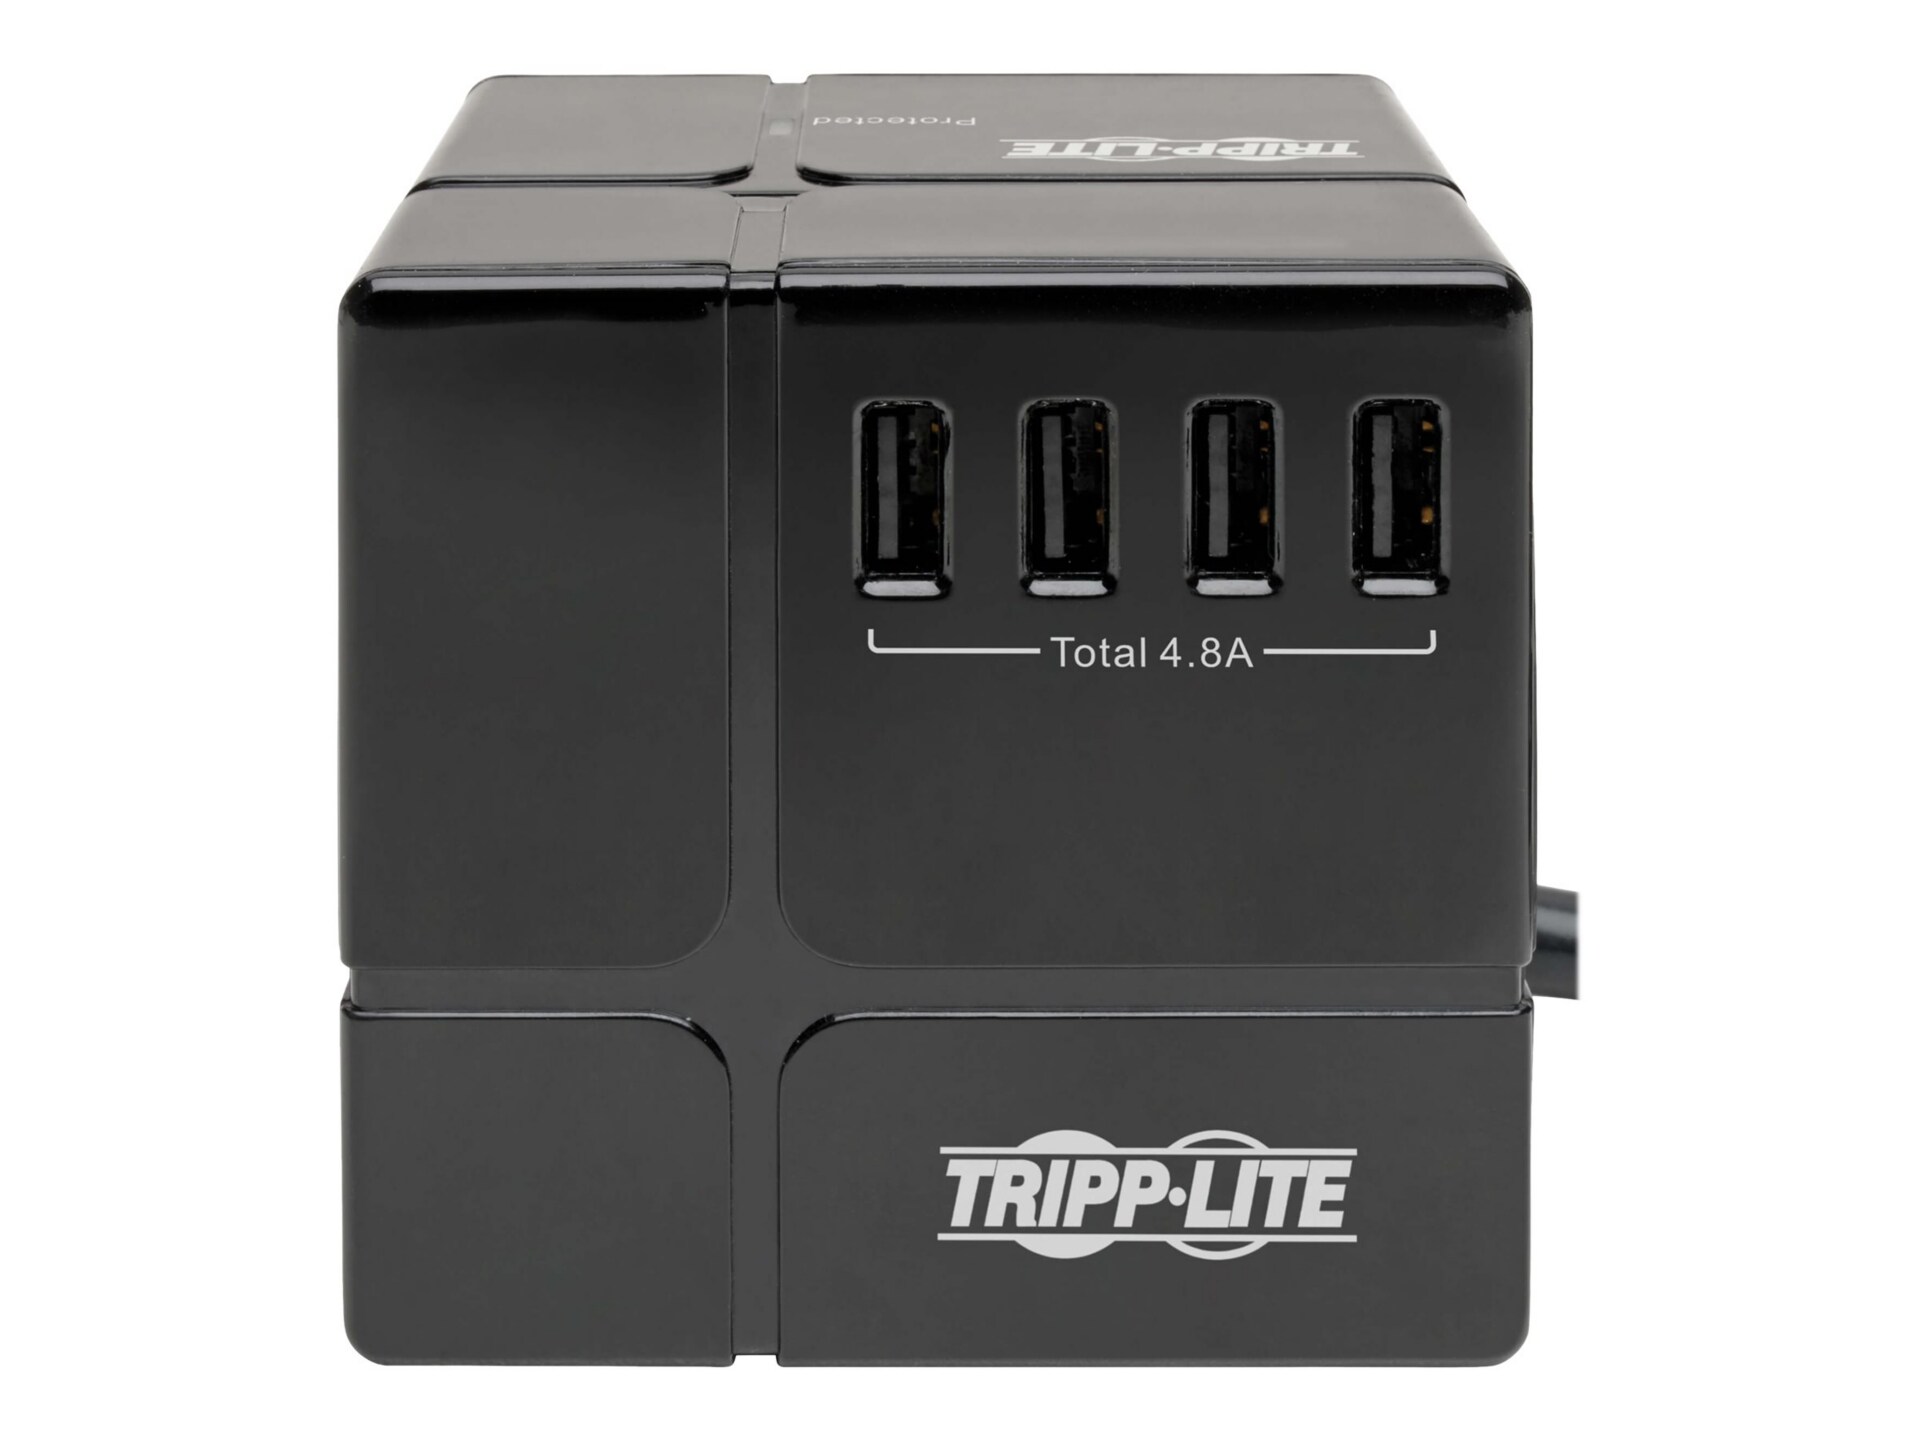 Tripp Lite Safe-IT 3-Outlet Cube Surge Protector - 5-15R Outlets, 6 USB Ports, 8 ft. (2.4 m) Cord, Antimicrobial